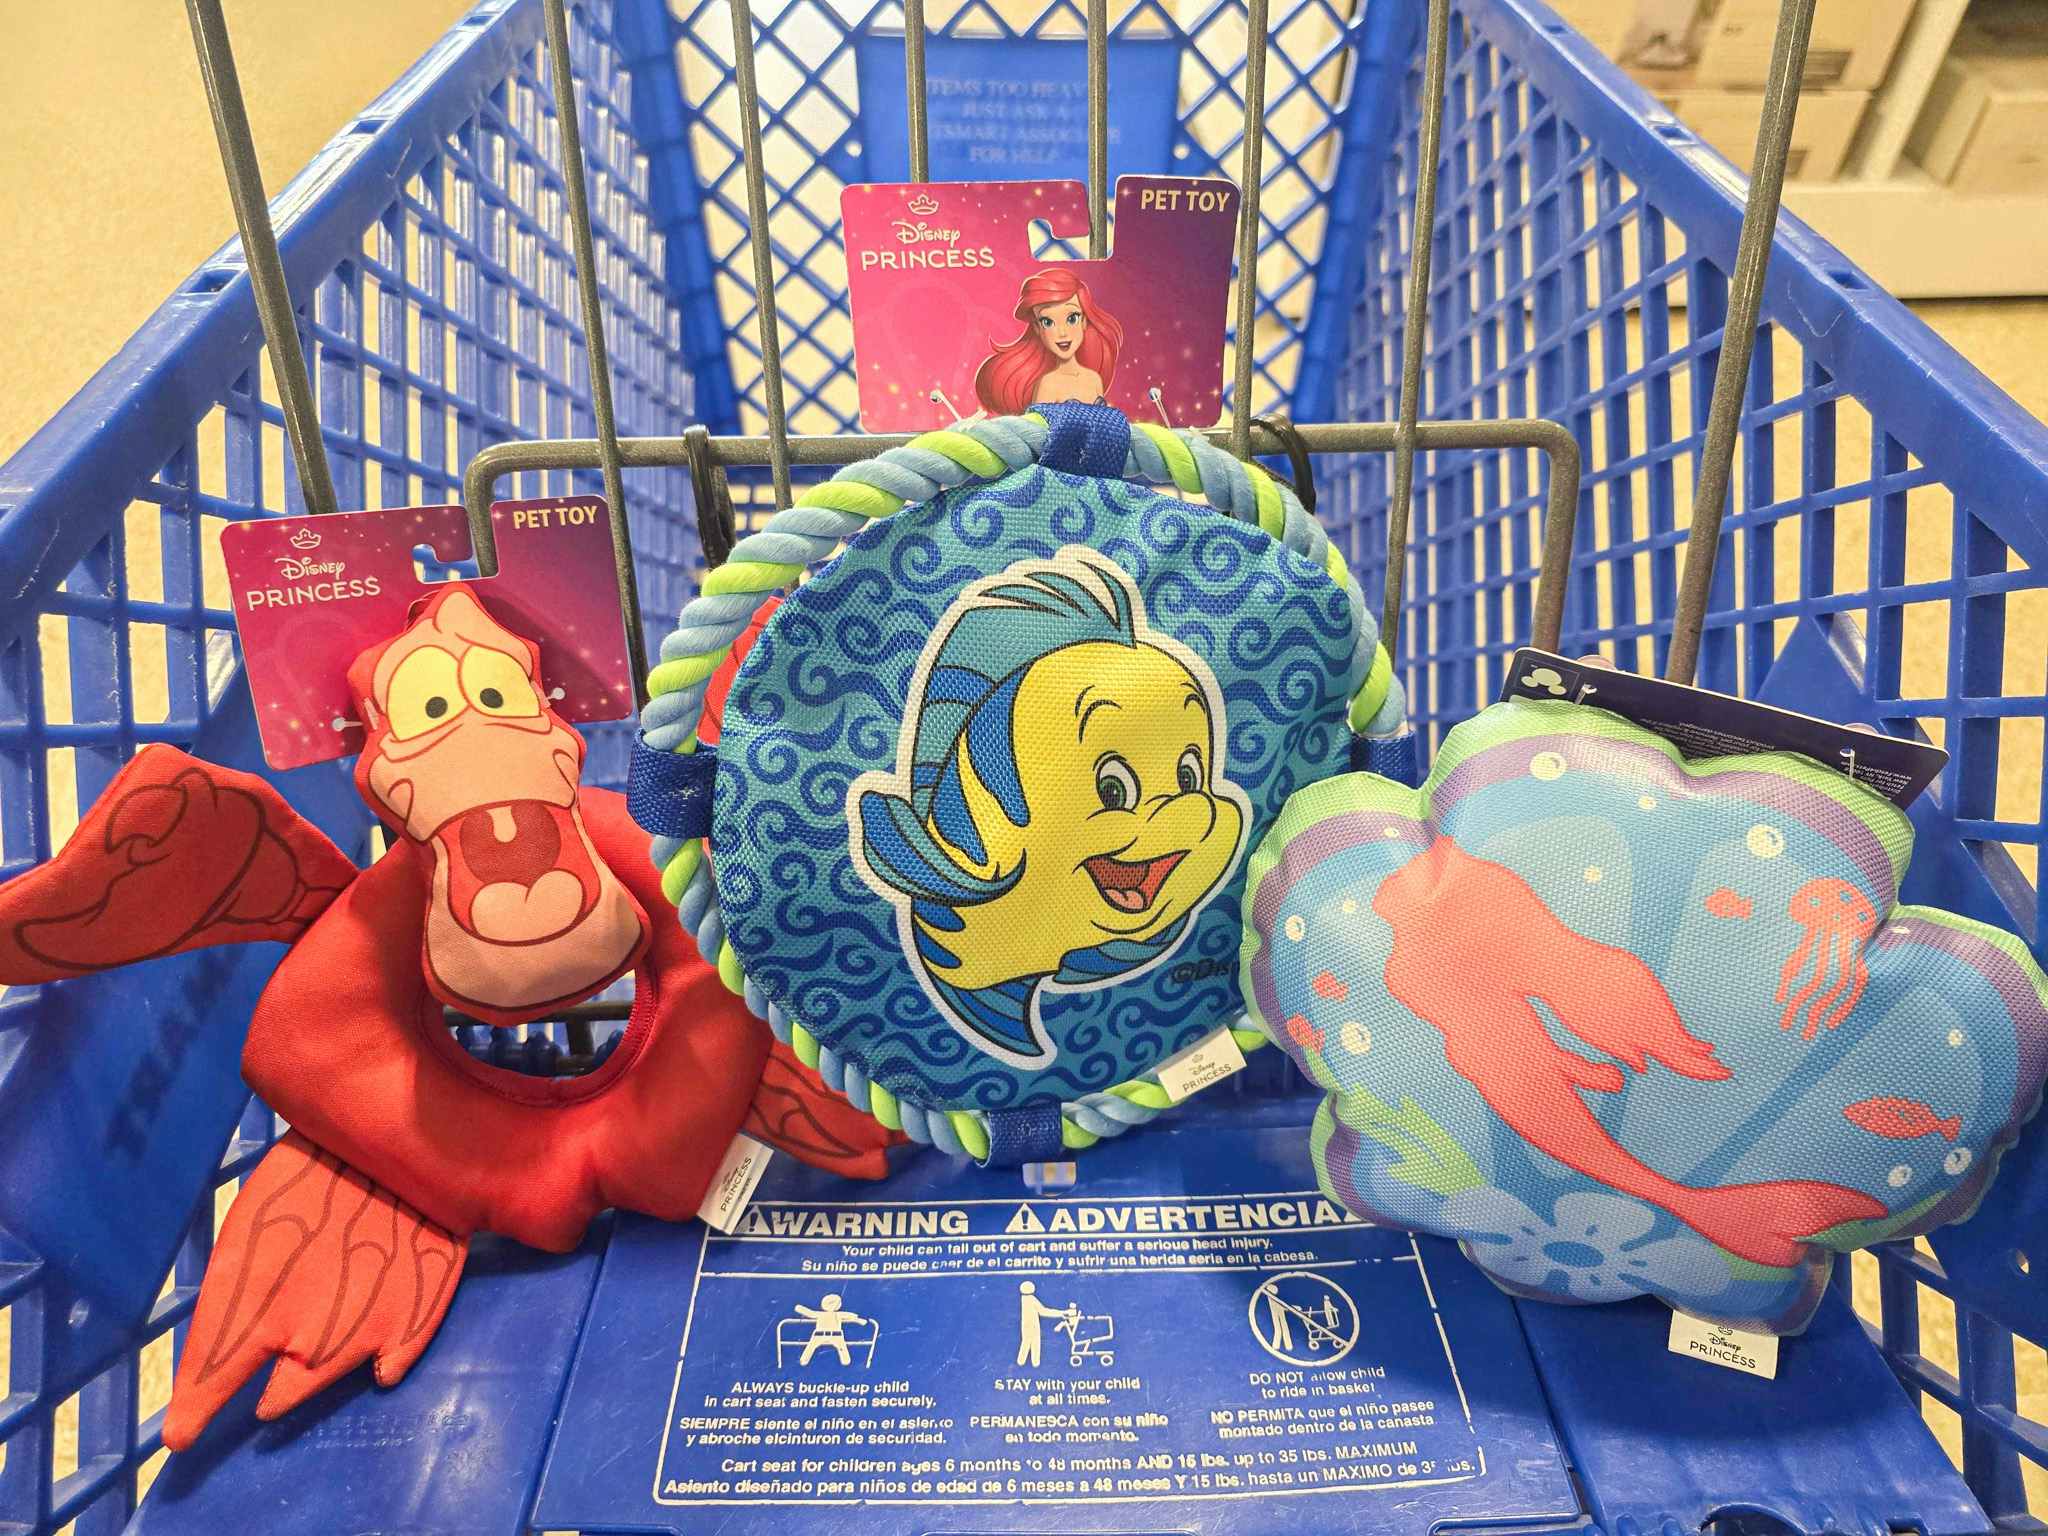 little mermaid themed dog toys in a cart